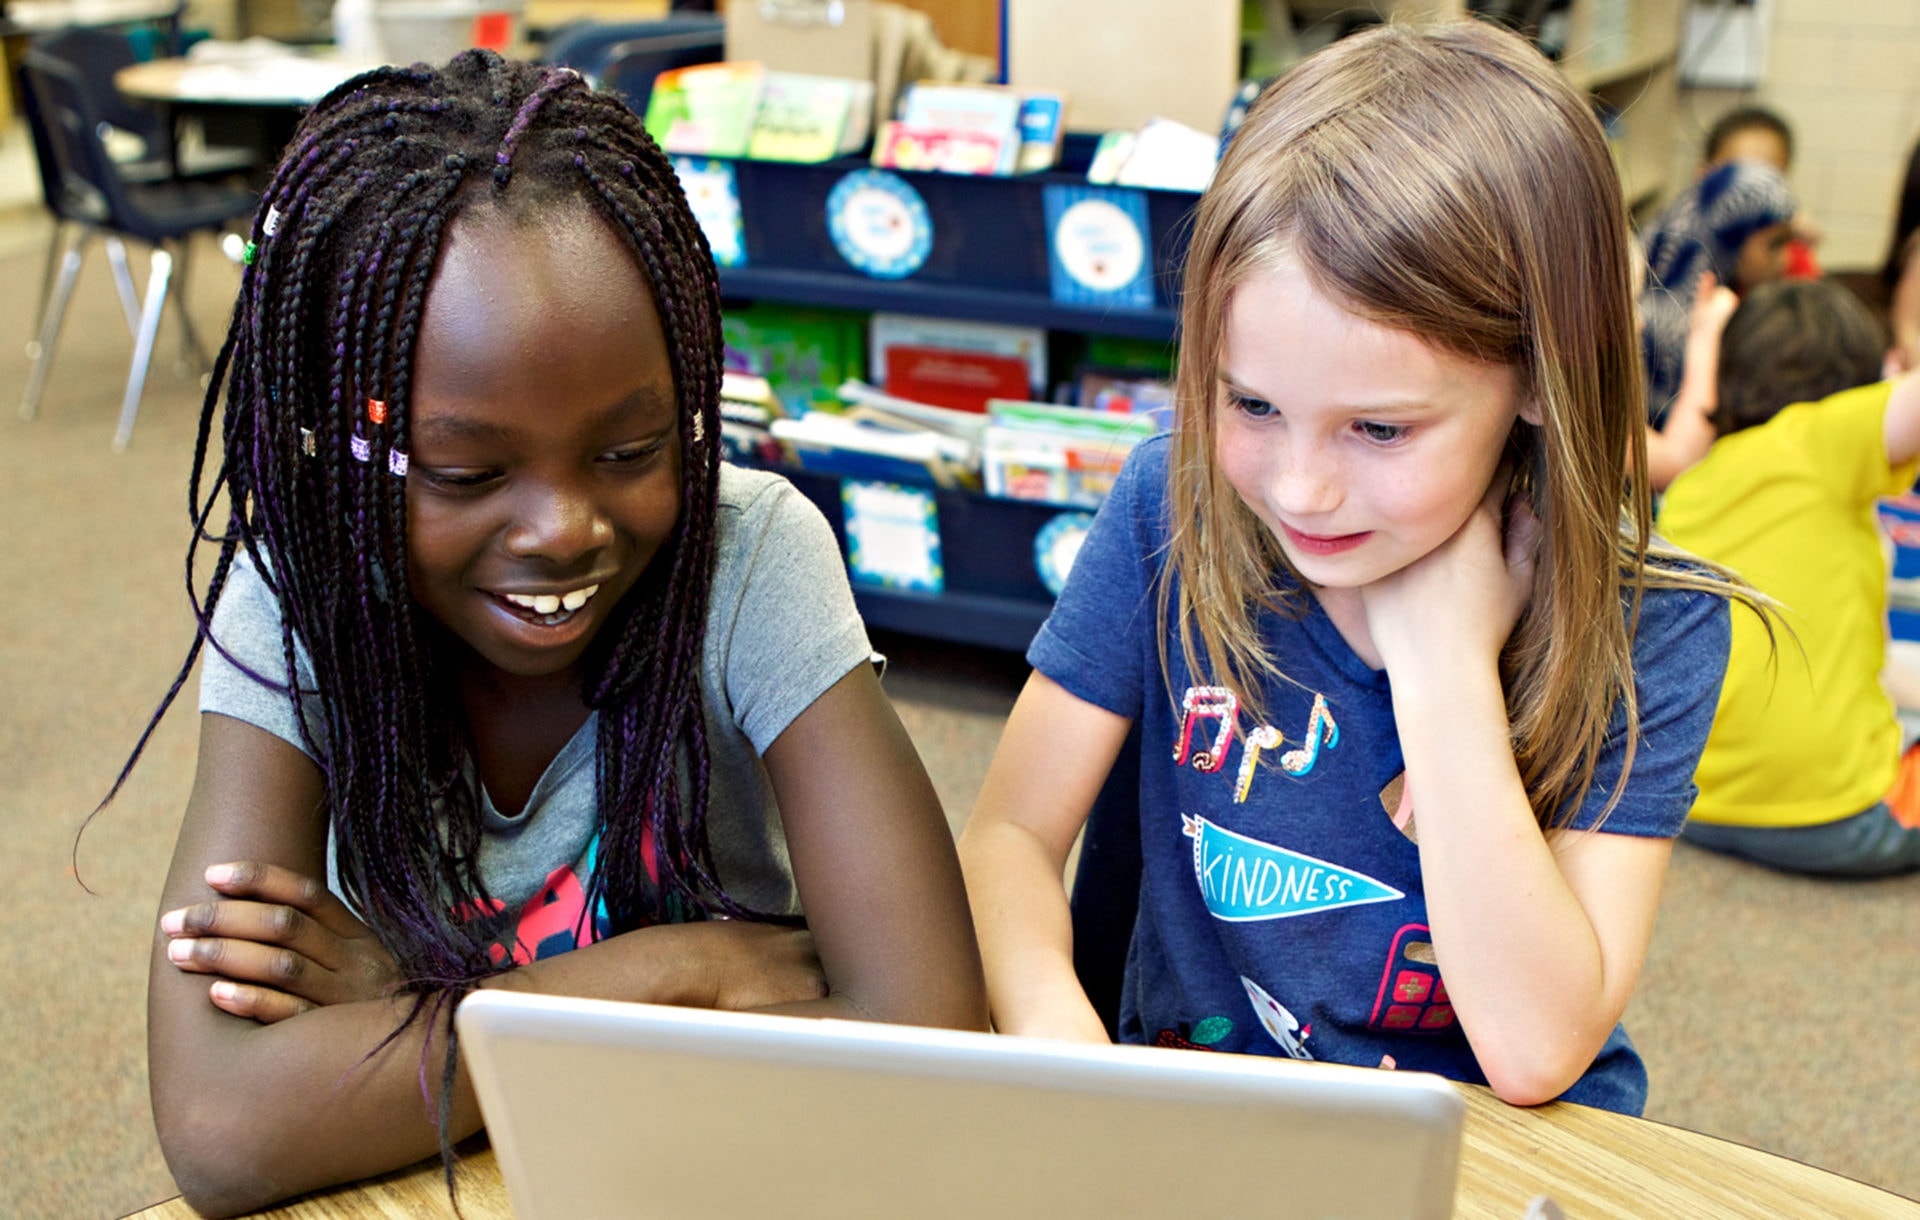 Two young girls, one with braided hair and the other with blonde hair, smiling and looking at a laptop screen in a classroom.